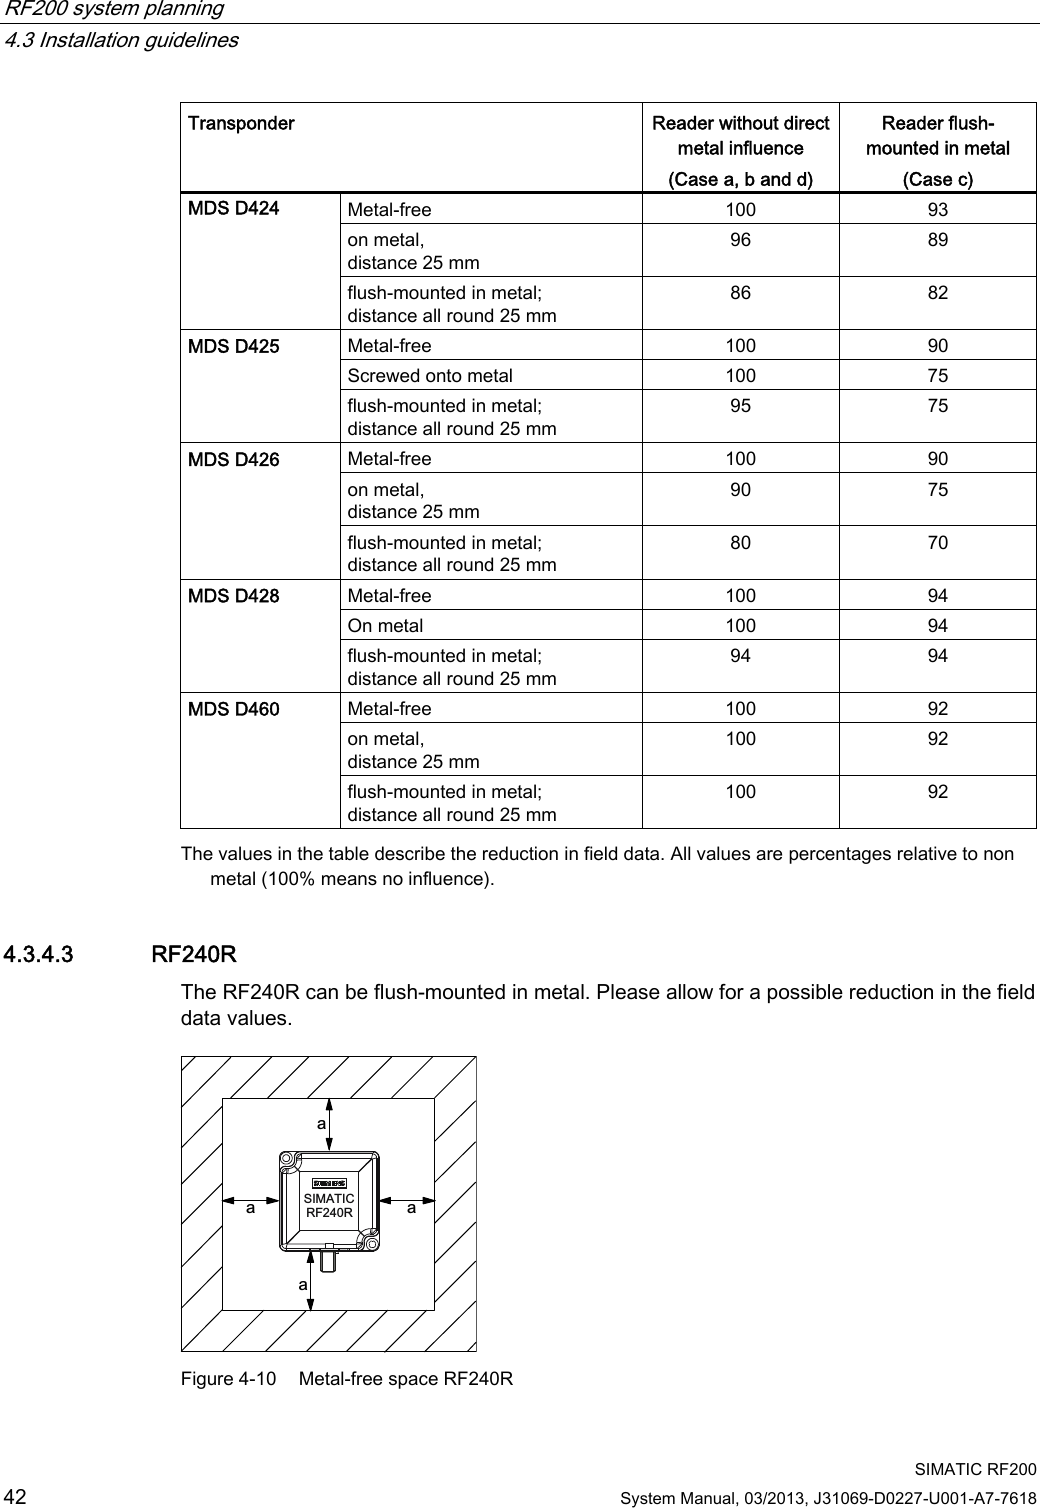 RF200 system planning   4.3 Installation guidelines  SIMATIC RF200 42 System Manual, 03/2013, J31069-D0227-U001-A7-7618 Transponder  Reader without direct metal influence (Case a, b and d) Reader flush-mounted in metal (Case c) Metal-free  100  93 on metal,  distance 25 mm 96  89 MDS D424 flush-mounted in metal; distance all round 25 mm 86  82 Metal-free  100  90 Screwed onto metal  100  75 MDS D425 flush-mounted in metal; distance all round 25 mm 95  75 Metal-free  100  90 on metal,  distance 25 mm 90  75 MDS D426 flush-mounted in metal; distance all round 25 mm 80  70 Metal-free  100  94 On metal  100  94 MDS D428 flush-mounted in metal; distance all round 25 mm 94  94 Metal-free  100  92 on metal,  distance 25 mm 100  92 MDS D460 flush-mounted in metal; distance all round 25 mm 100  92 The values in the table describe the reduction in field data. All values are percentages relative to non metal (100% means no influence). 4.3.4.3 RF240R The RF240R can be flush-mounted in metal. Please allow for a possible reduction in the field data values.  6,0$7,&amp;DDDD5)5 Figure 4-10  Metal-free space RF240R  